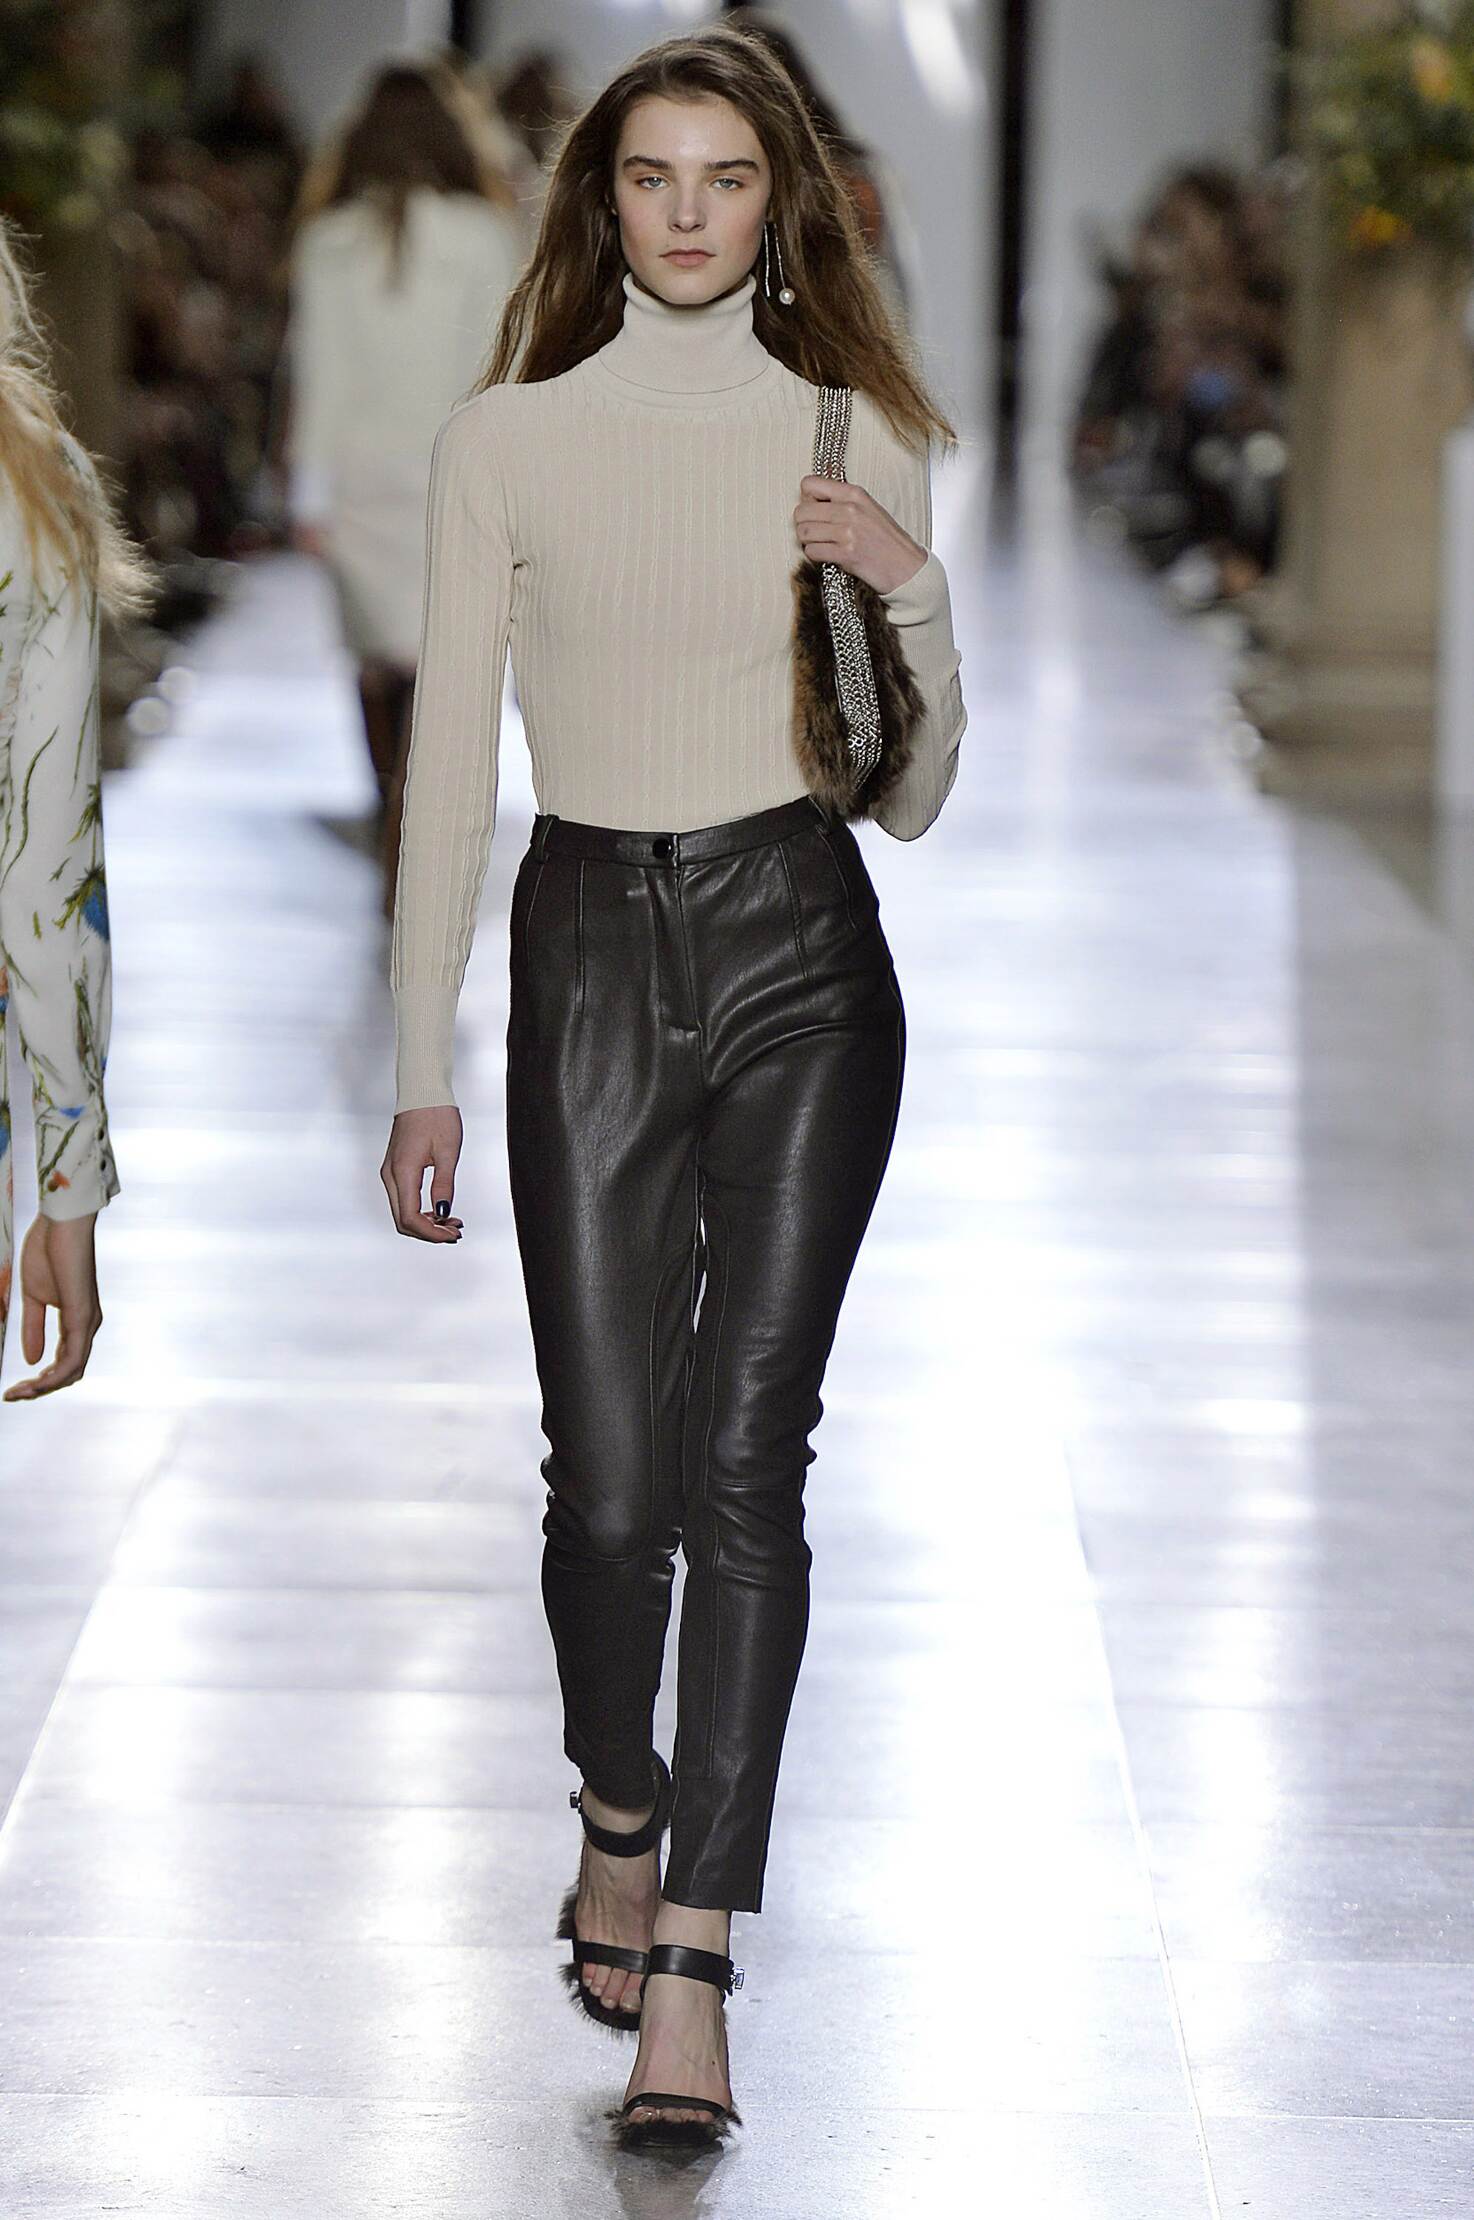 TOPSHOP UNIQUE FALL WINTER 2015-16 WOMEN’S COLLECTION | The Skinny Beep